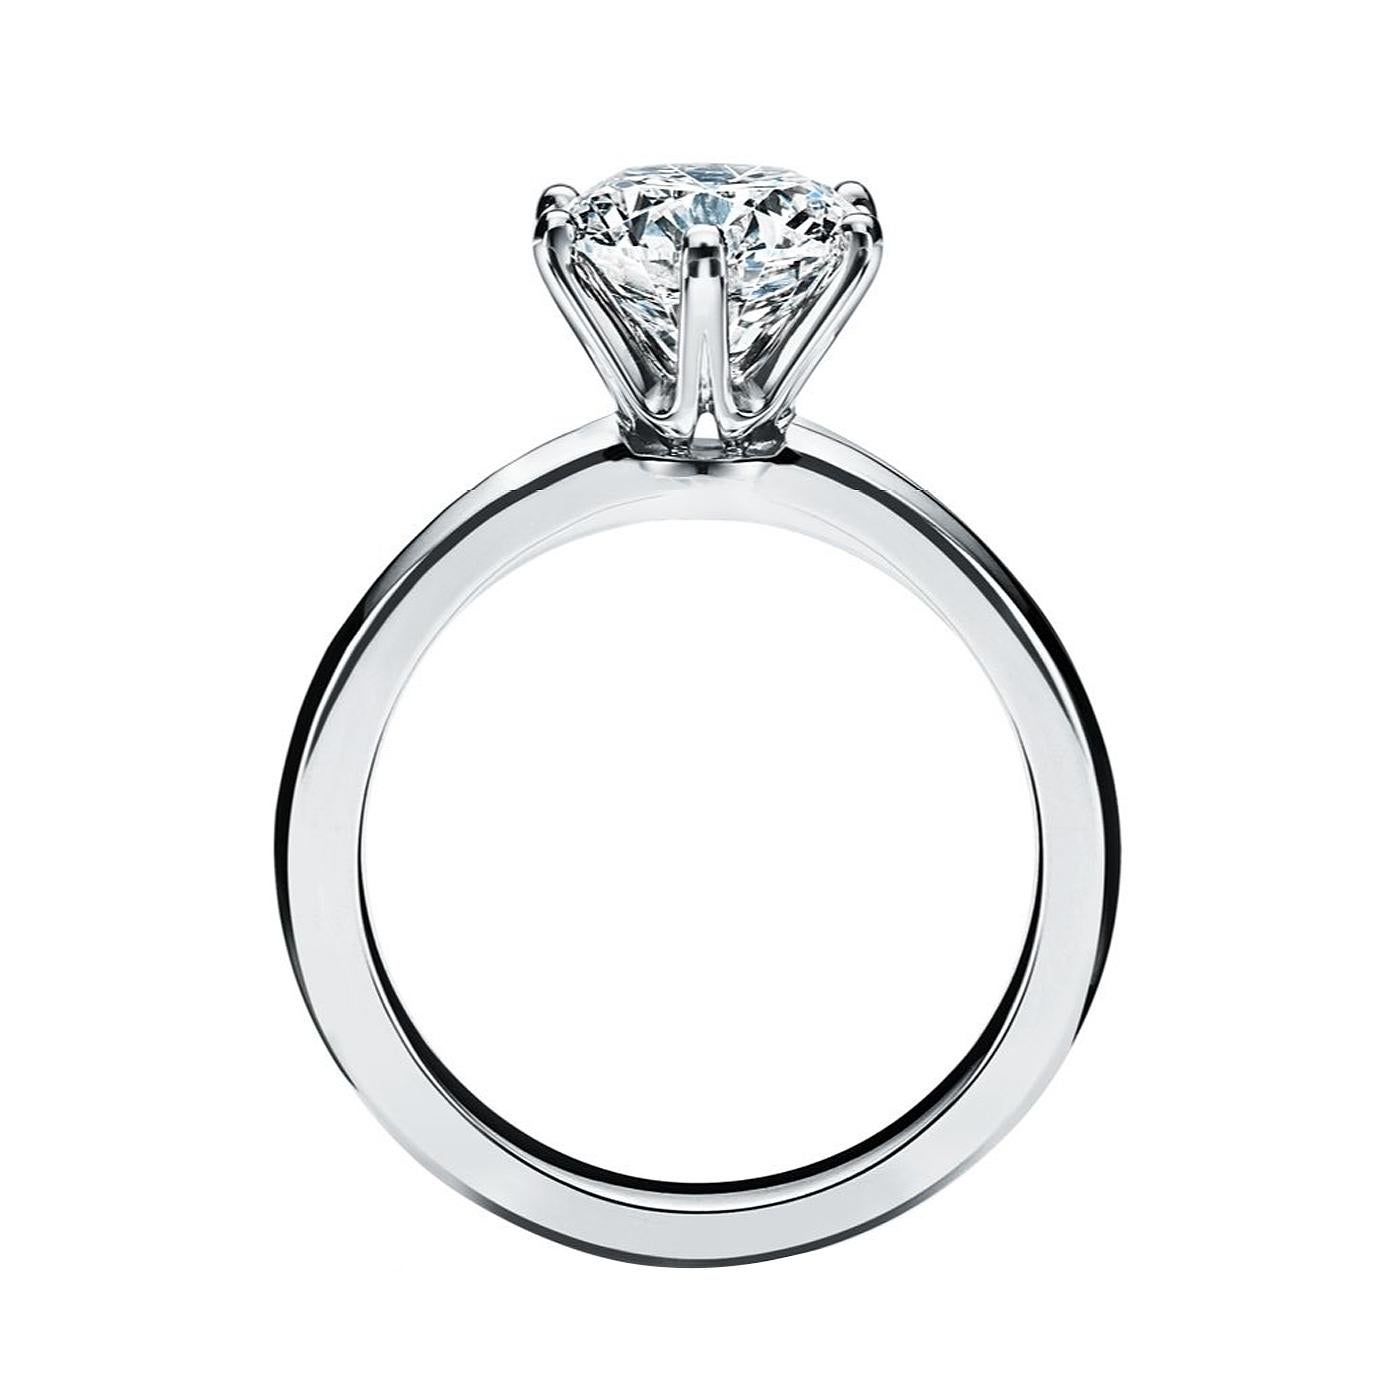 A true design masterpiece, the Tiffany Setting is the world’s most iconic engagement ring. Flawlessly engineered, the six-prong setting virtually disappears and allows the brilliant diamond to float above the band and into the light, resulting in a